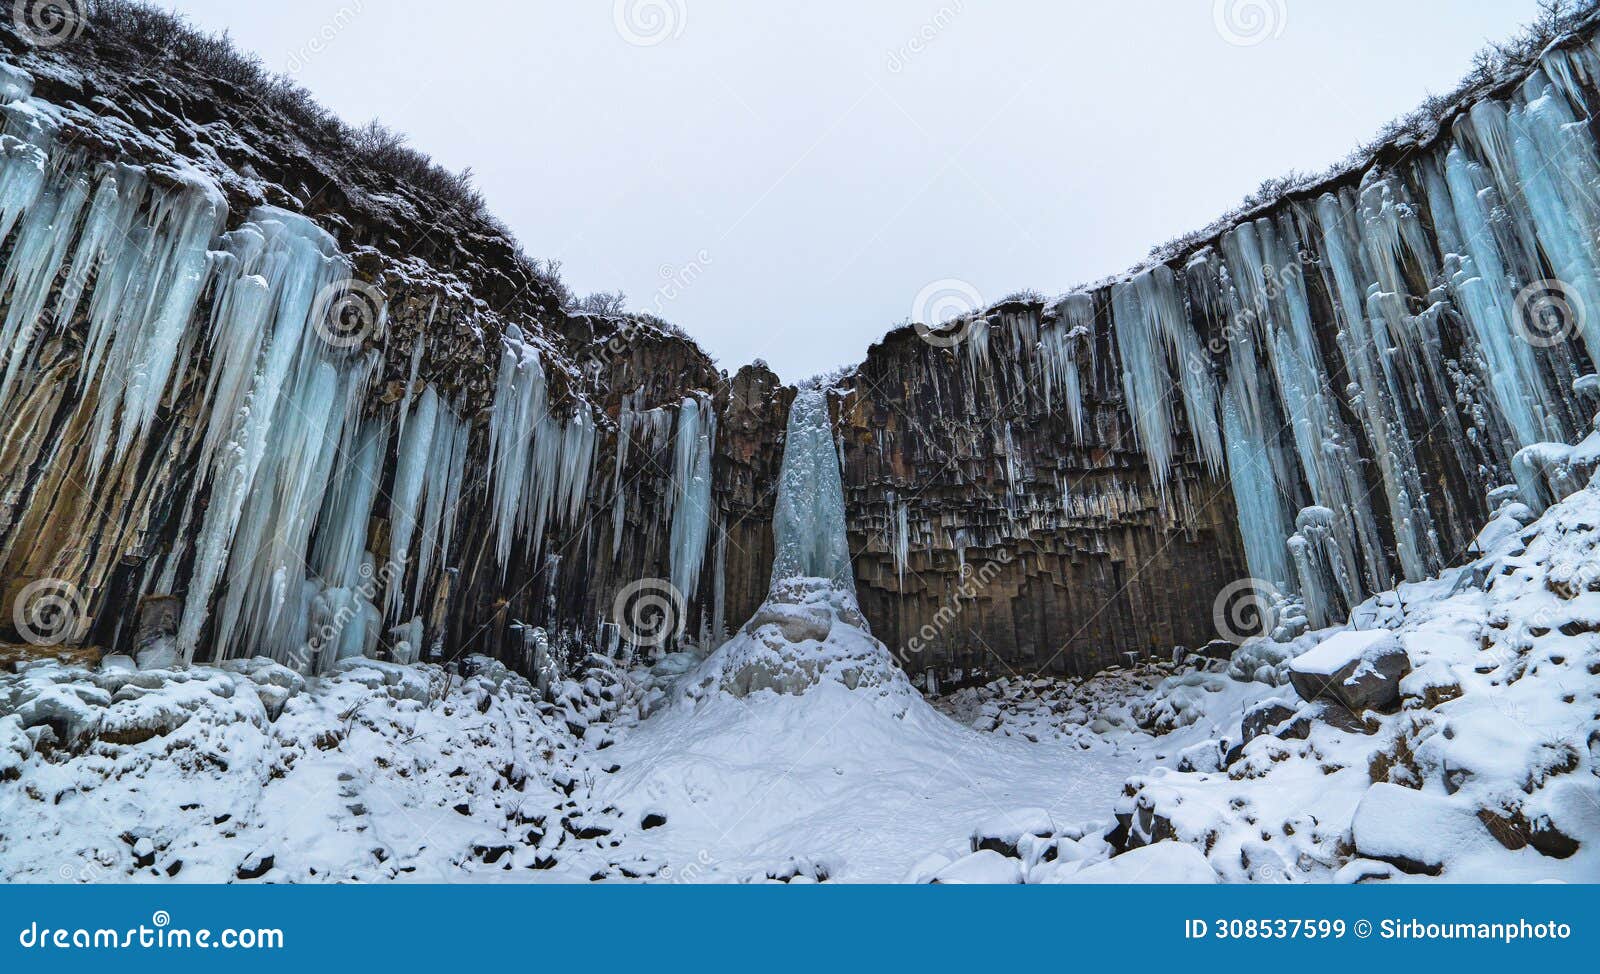 svartifoss iceland black waterfall completely frozen with bluish stalactites and snow under white sky